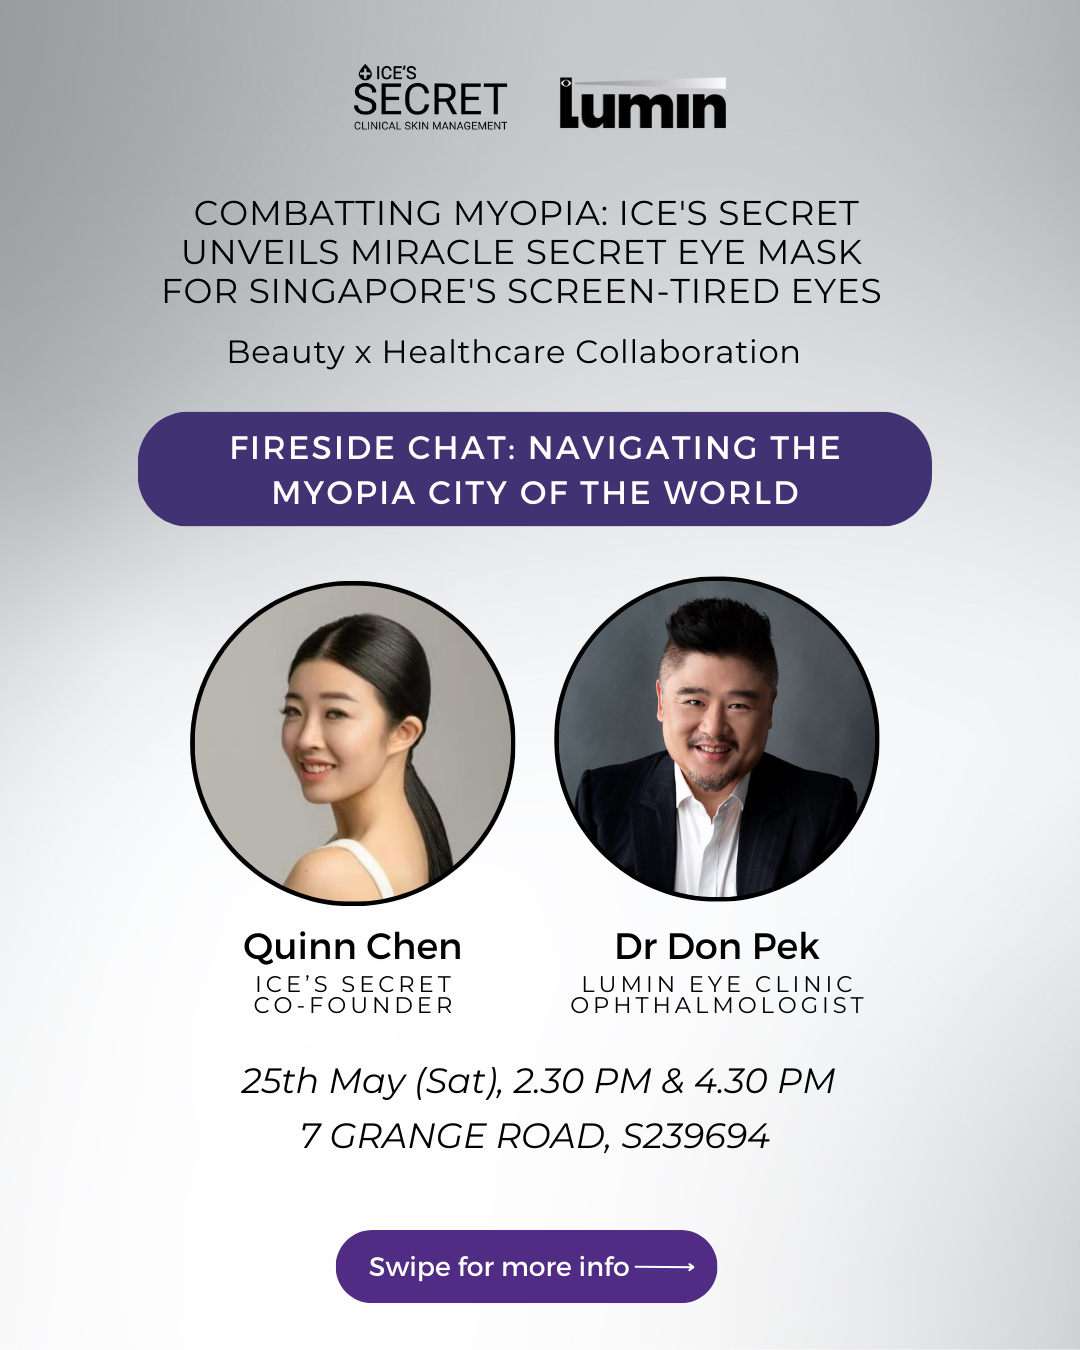 [EVENT] Fireside Chat: Navigating the Myopia City of the World Fireside Chat